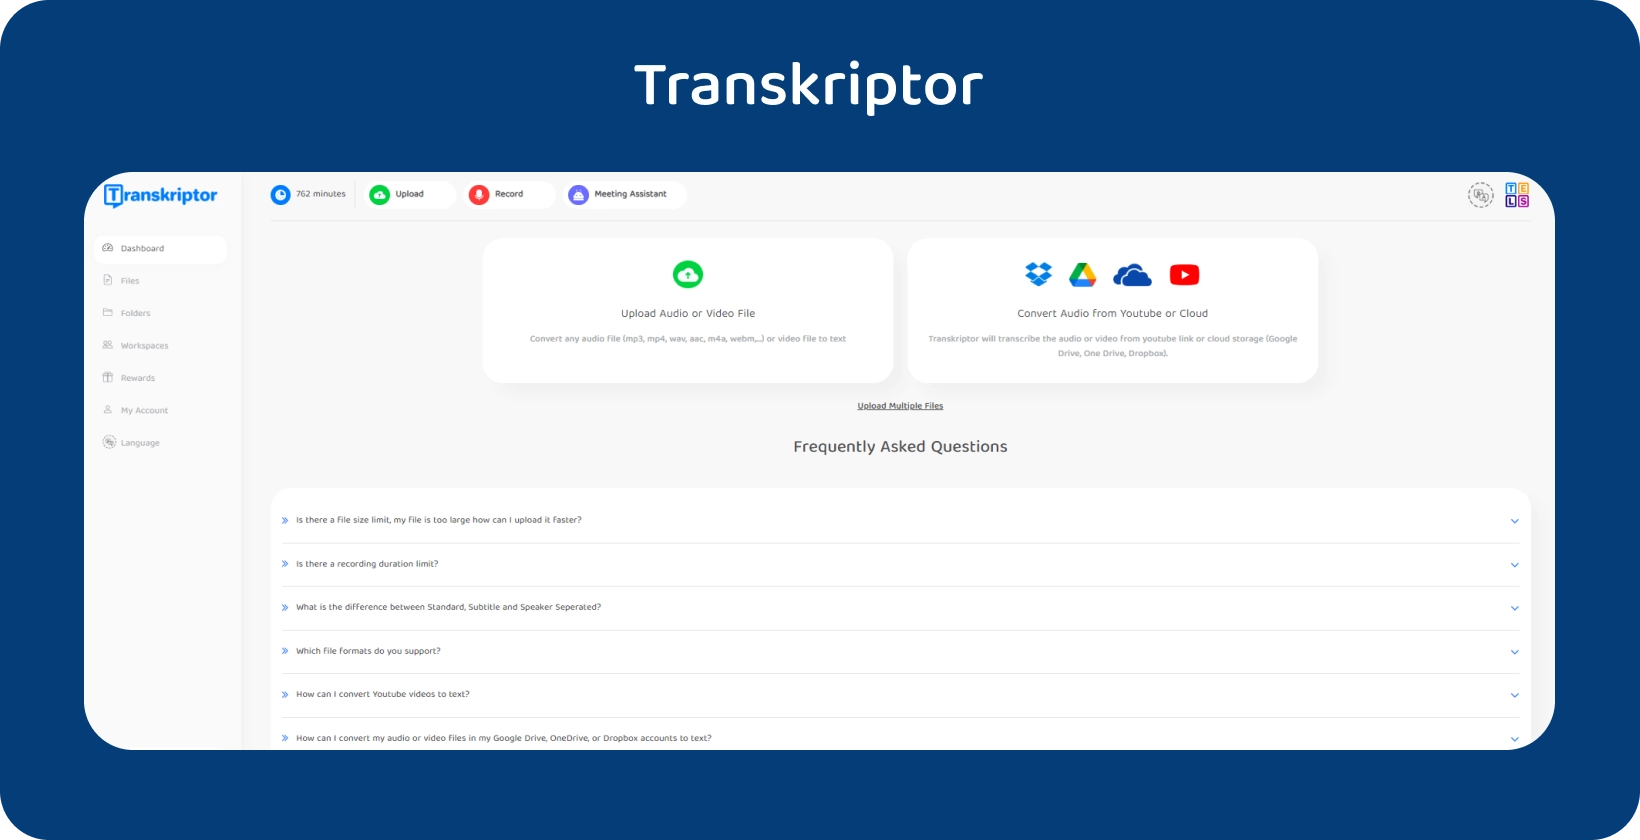 Transkriptor's interface promoting its audio-to-text conversion service.